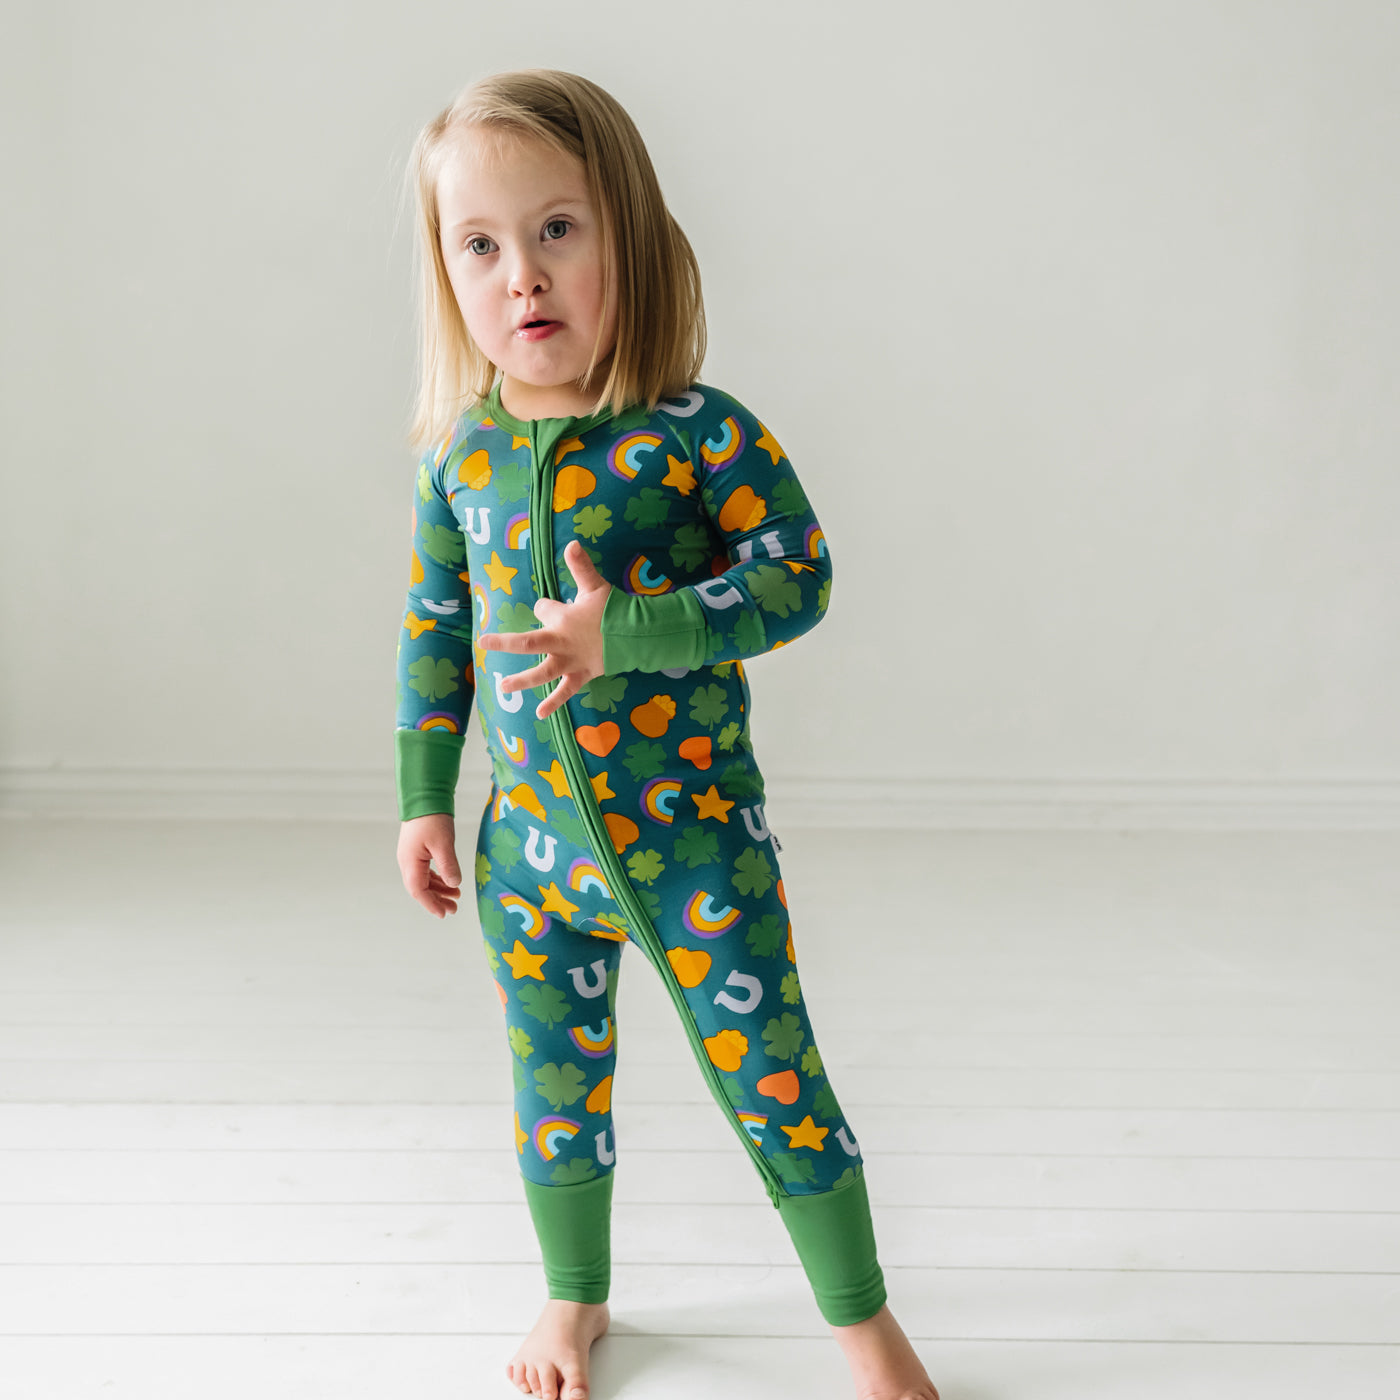 Child wearing a Lucky printed zippy